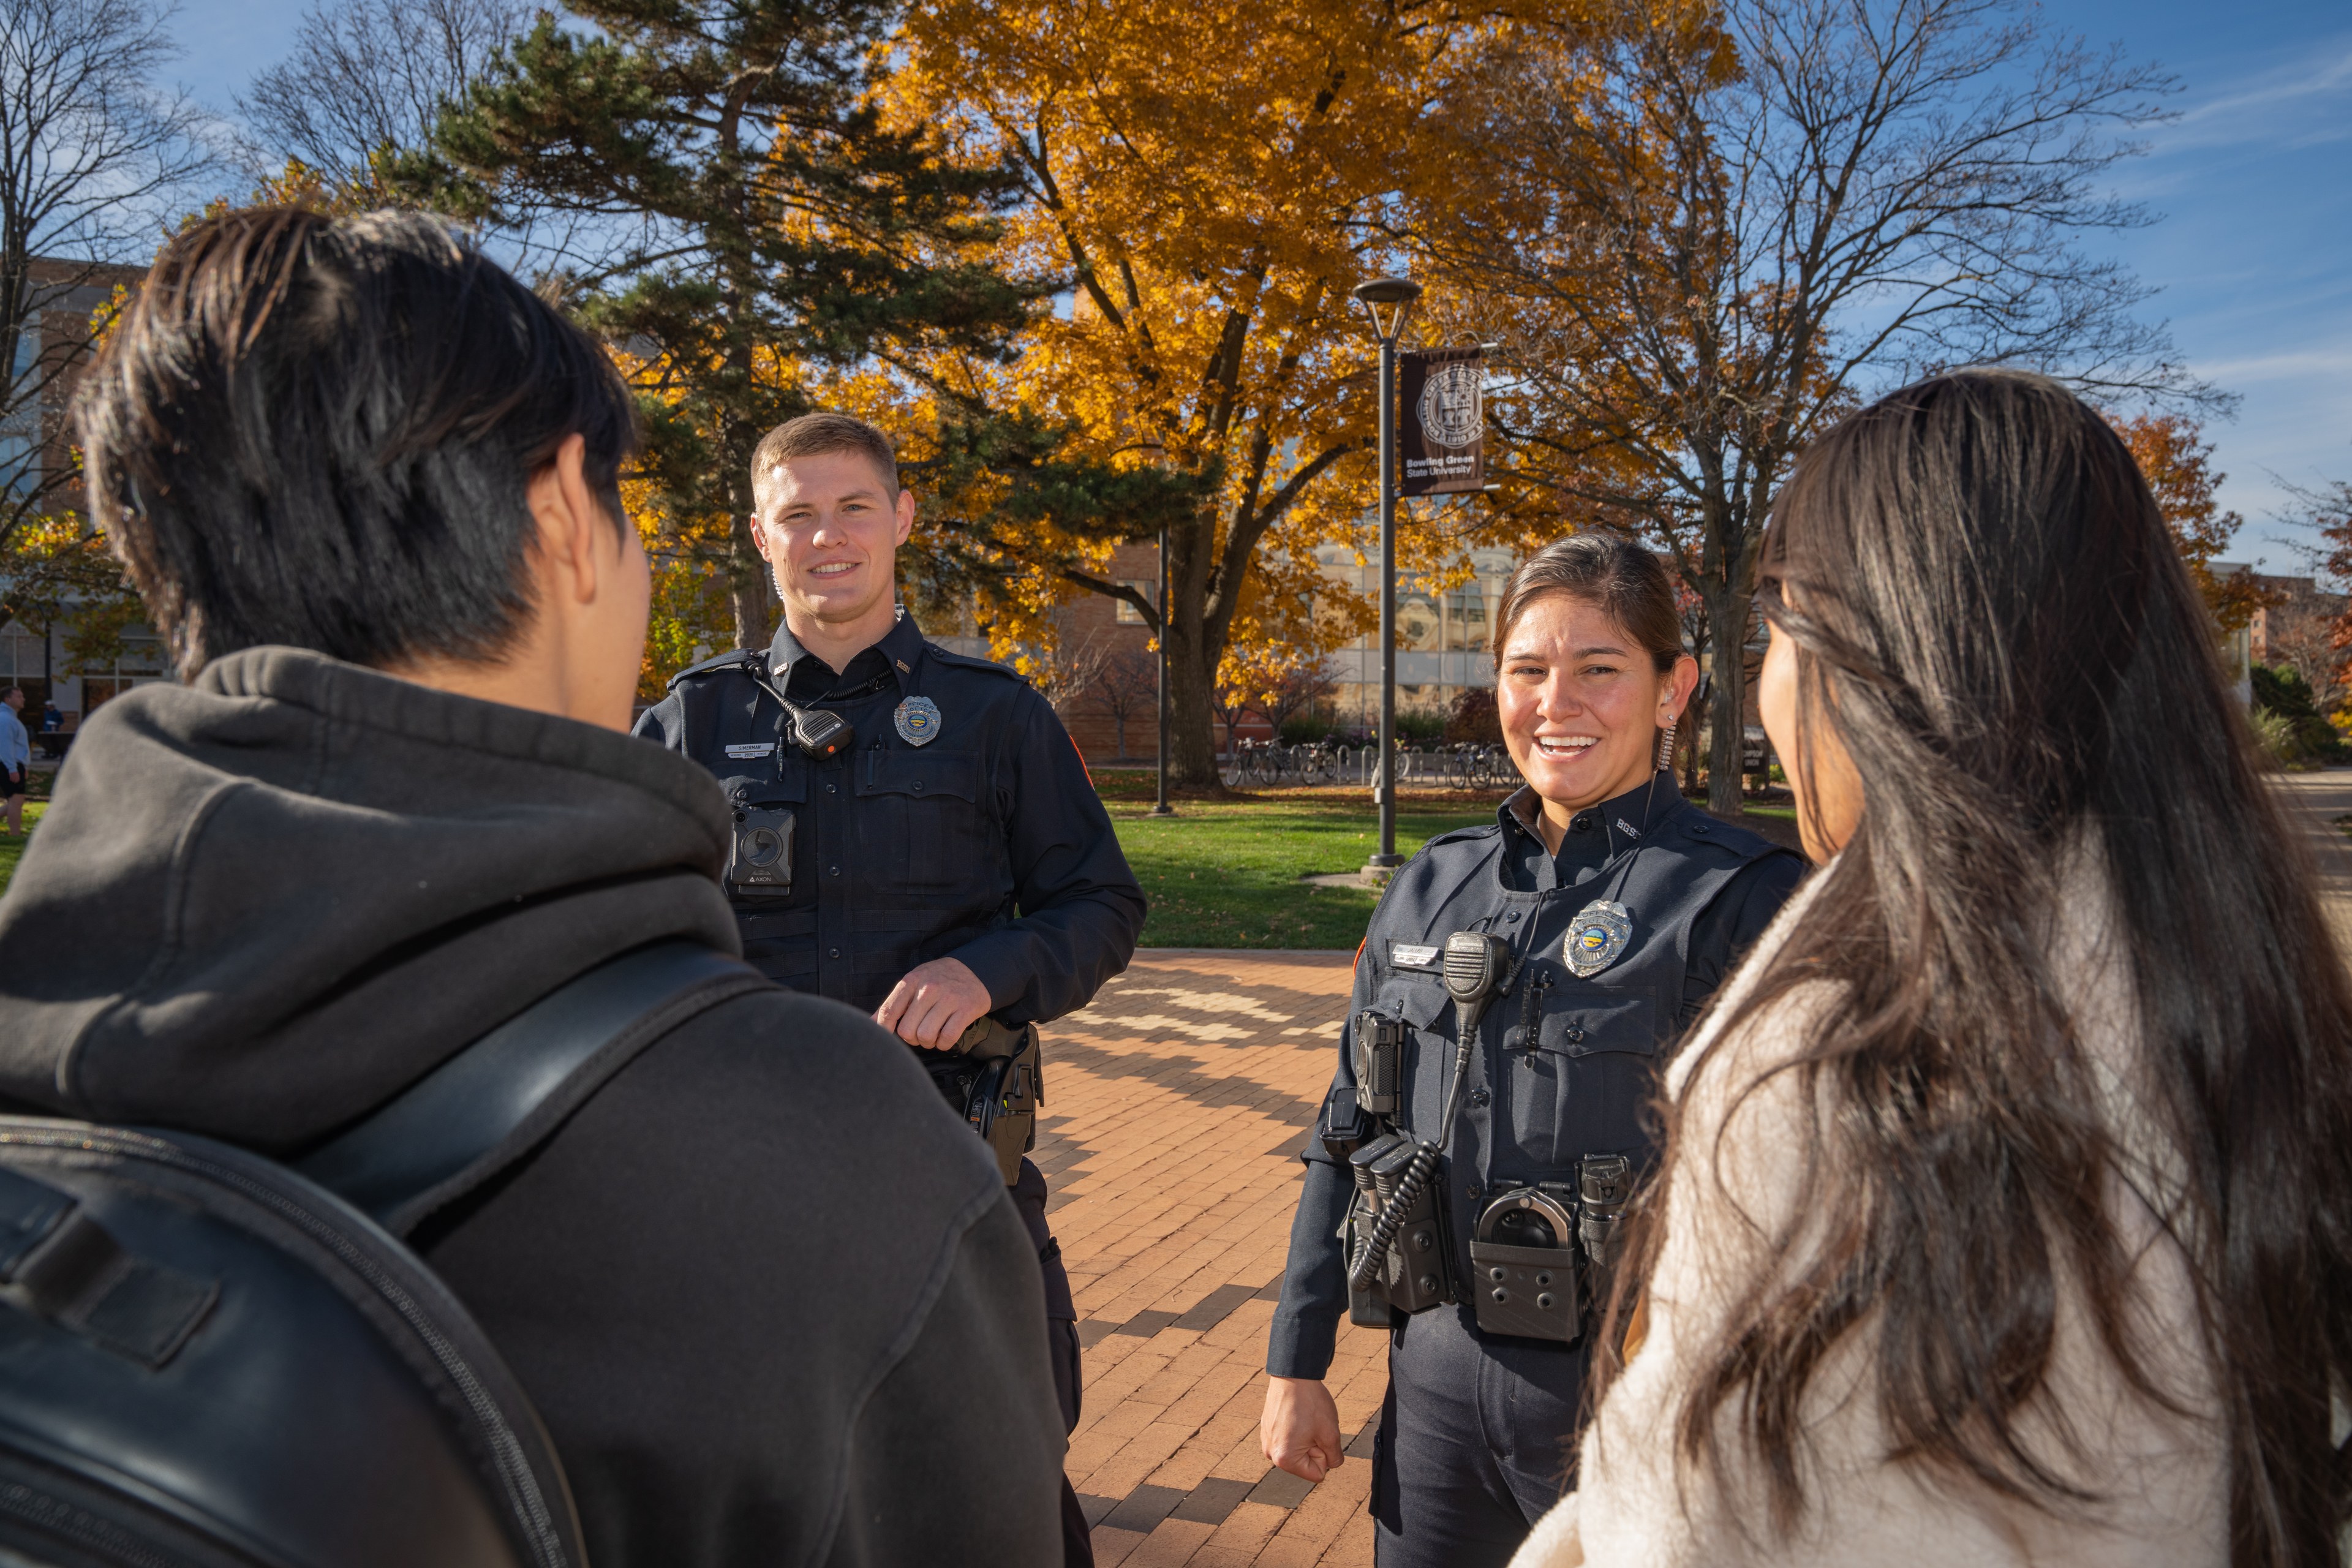 Two BGSU Police officers chat with students outside the Bowen-Thompson Student Union on campus.